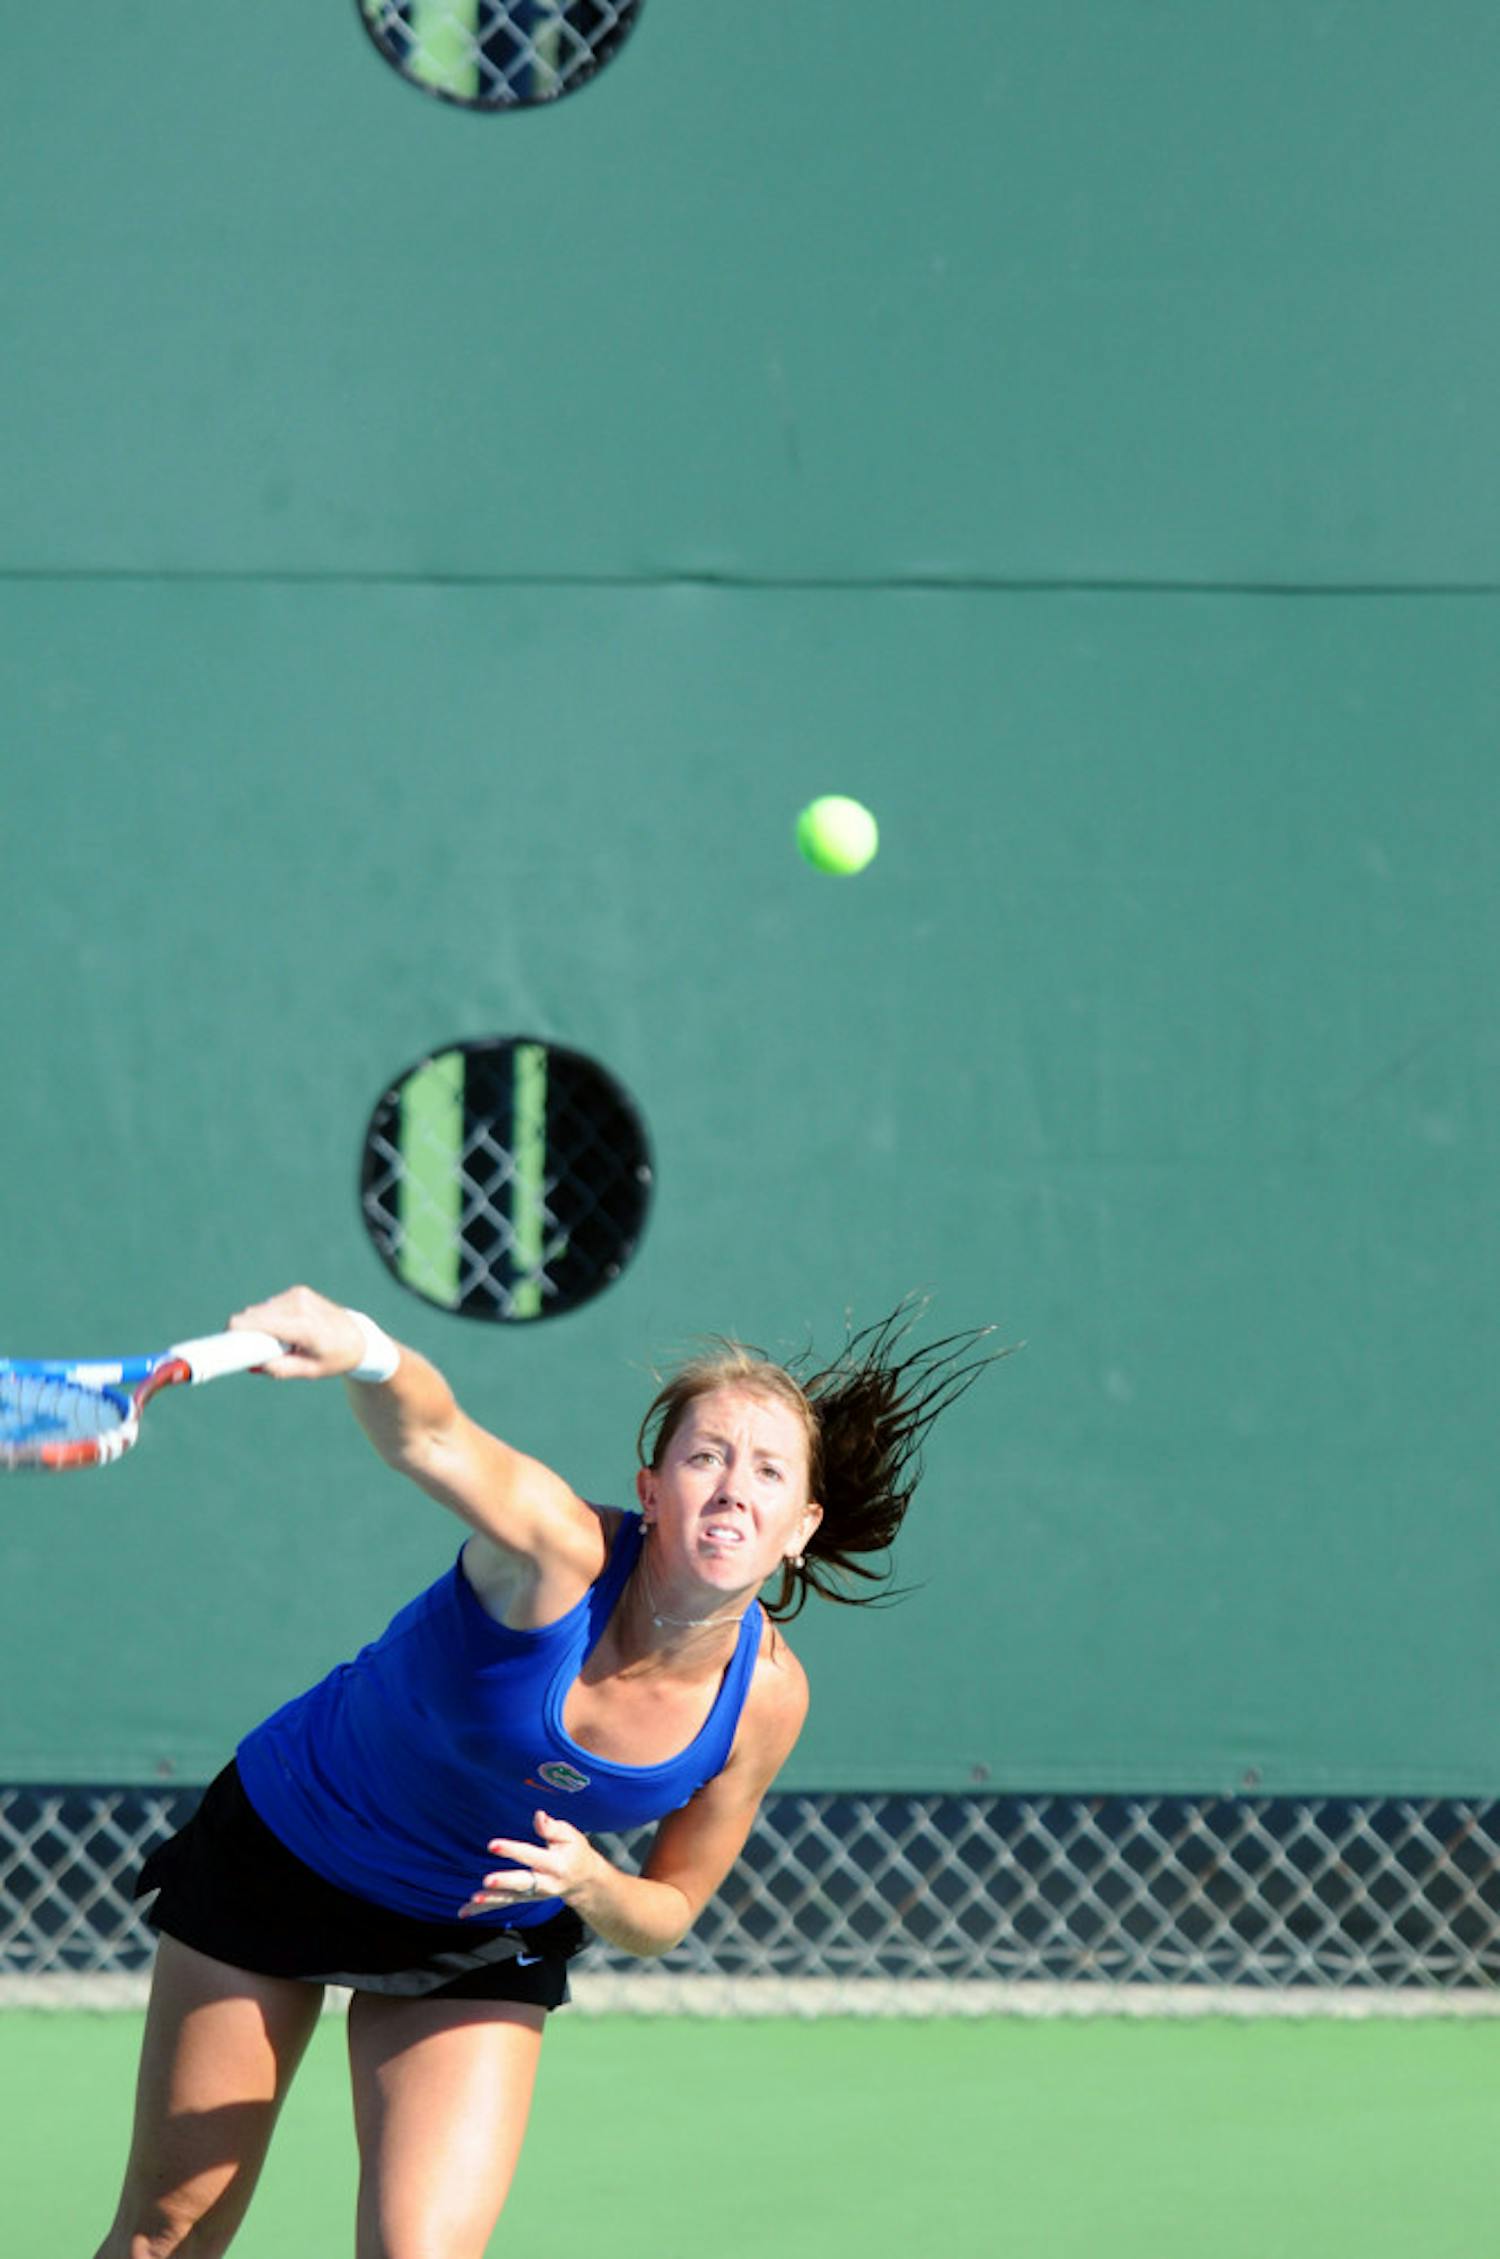 Senior Lauren Embree serves during a match between Florida and Georgia on Oct. 24, 2011, at the Ring Tennis Complex.